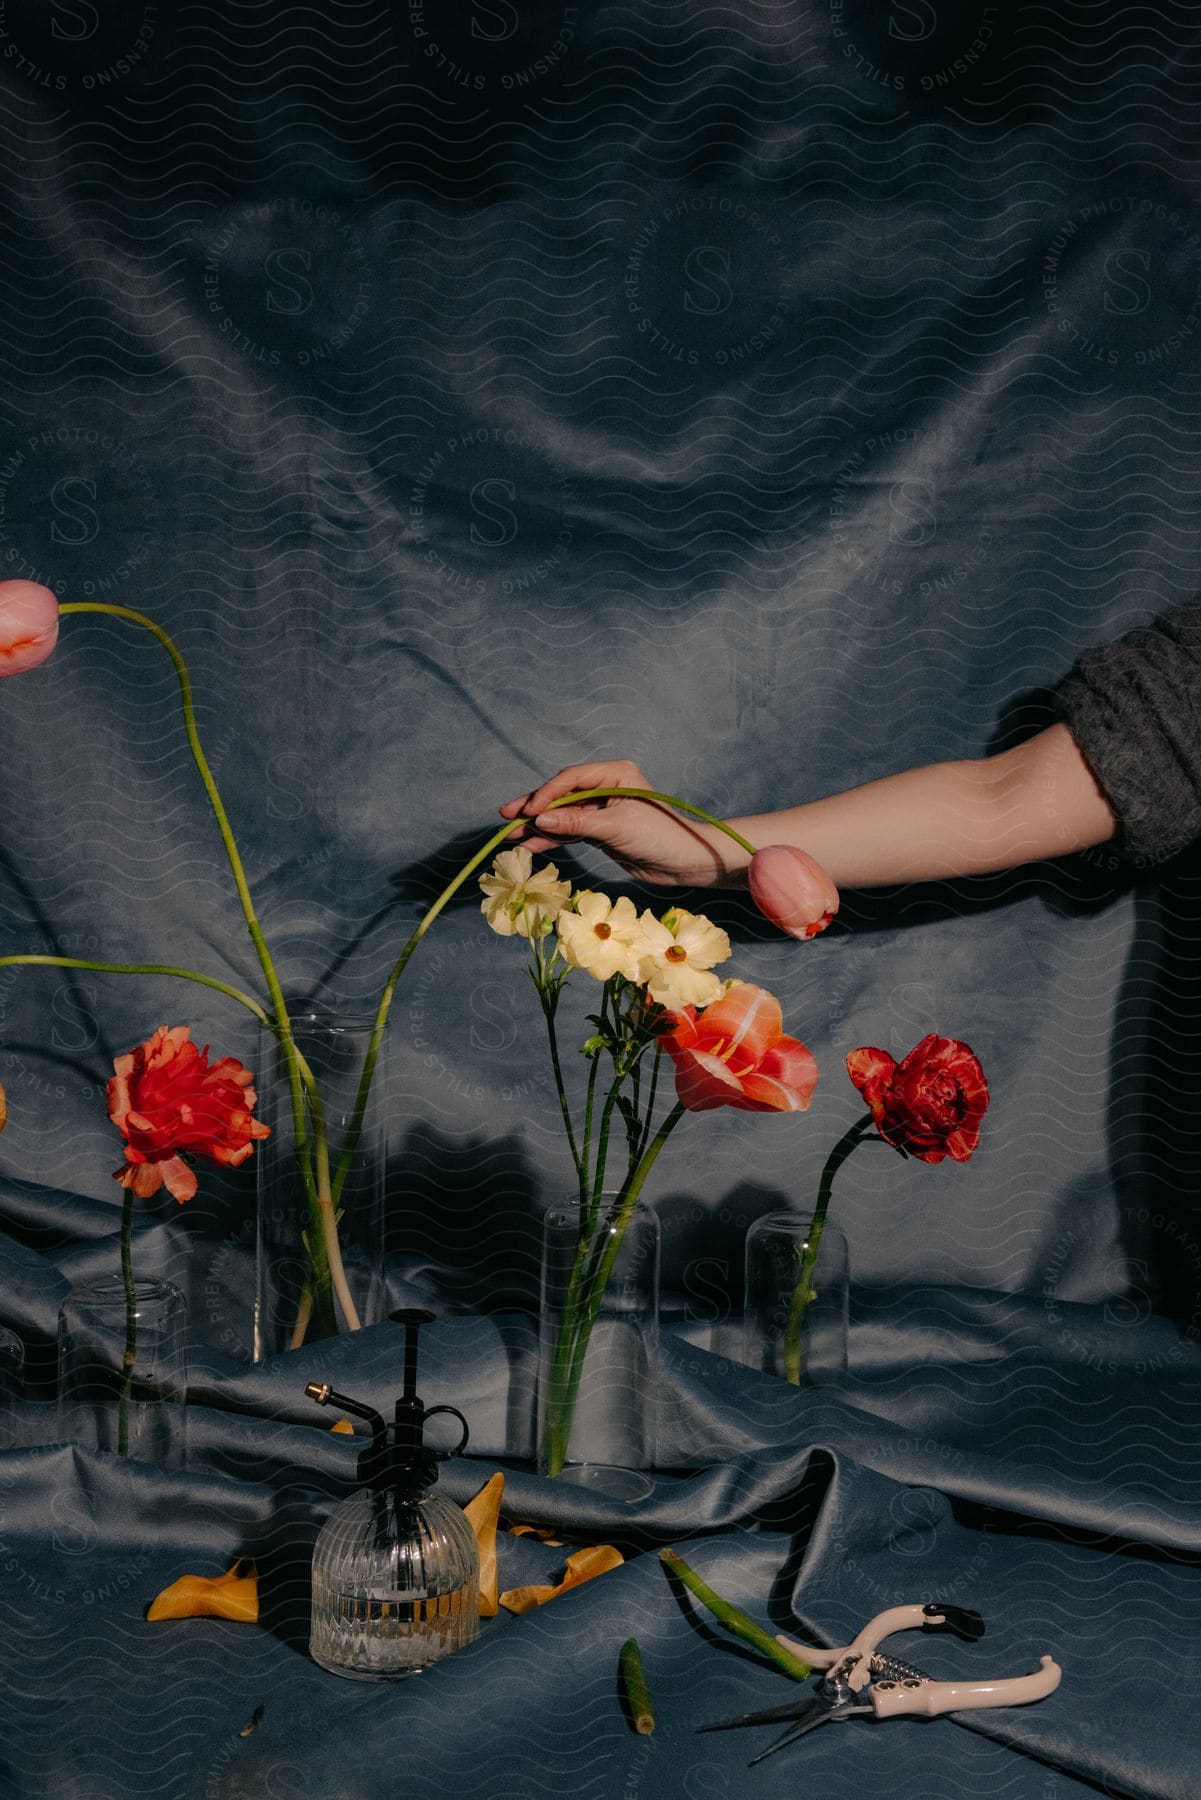 A hand arranging flowers in a vase against a dark background